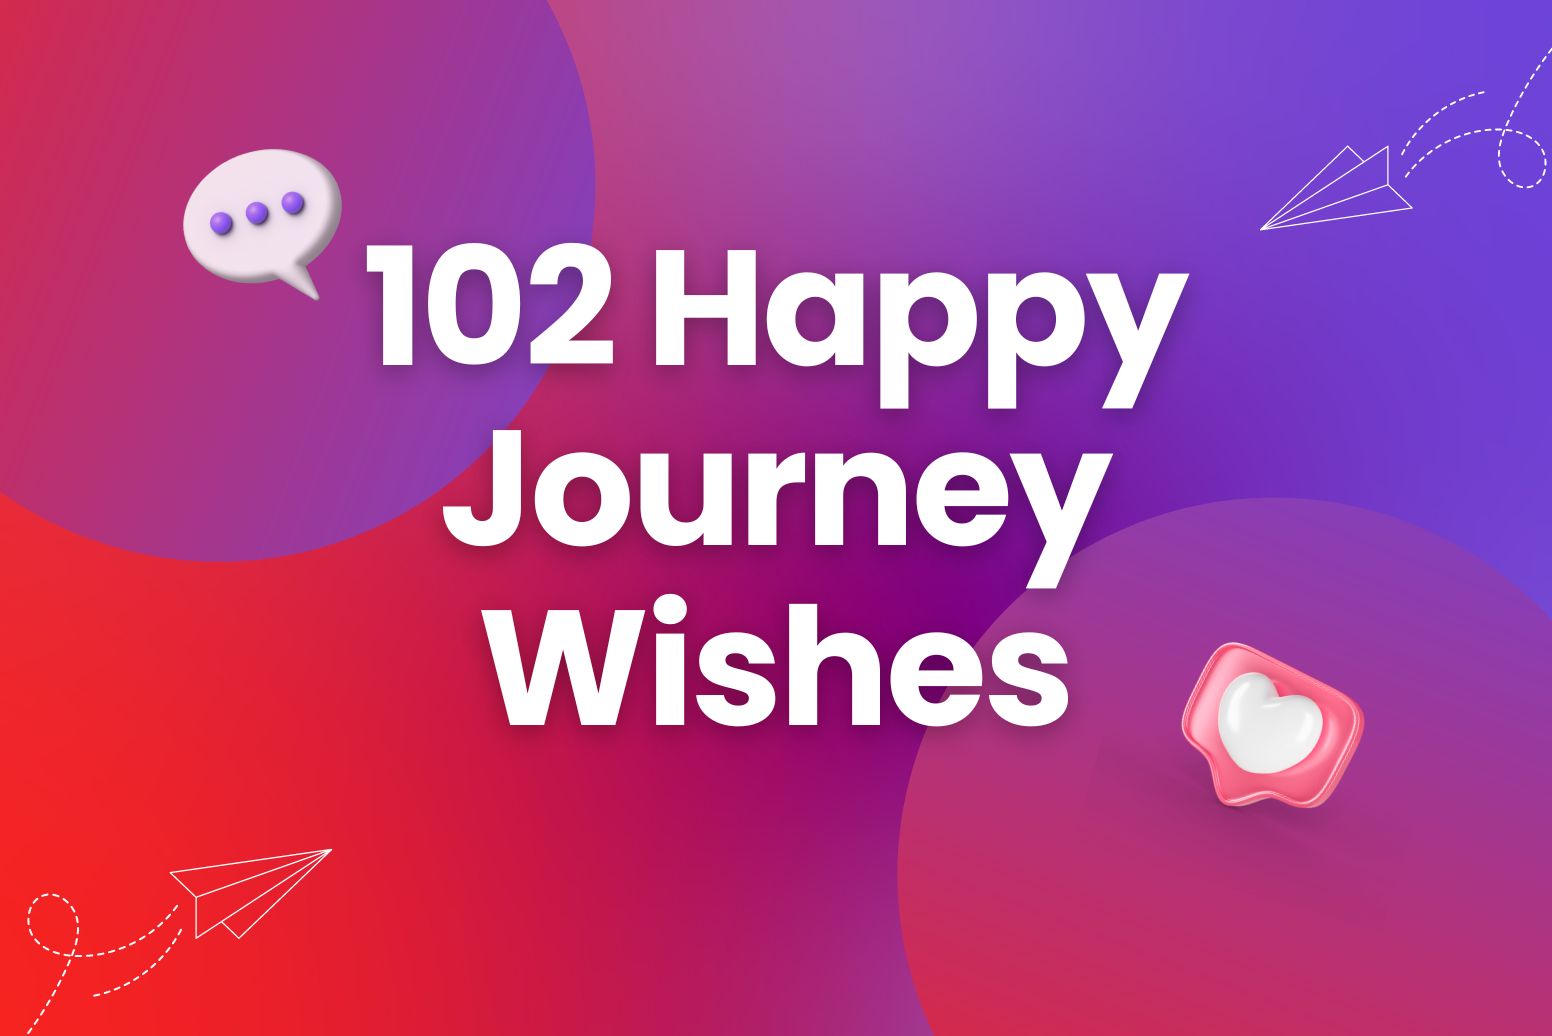 102 Happy Journey Wishes for the Voyage Ahead